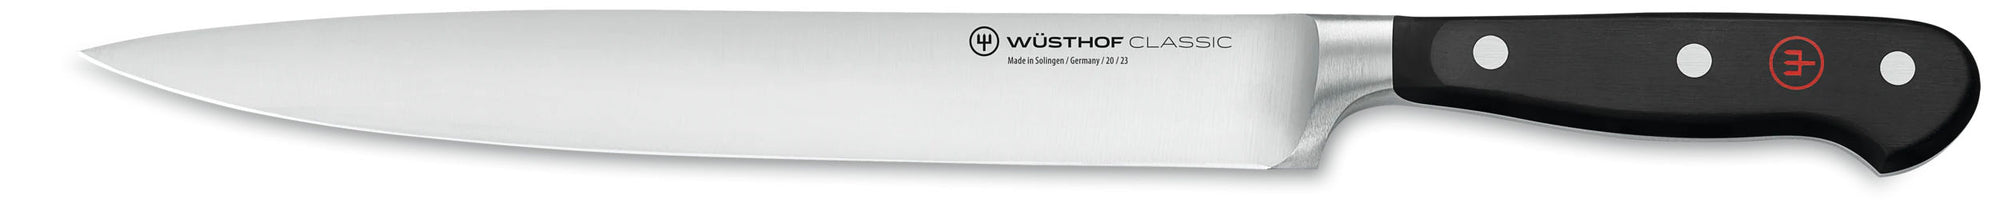 Wusthof Classic Carving Knife, 9-inch (23 cm) - 4522-23